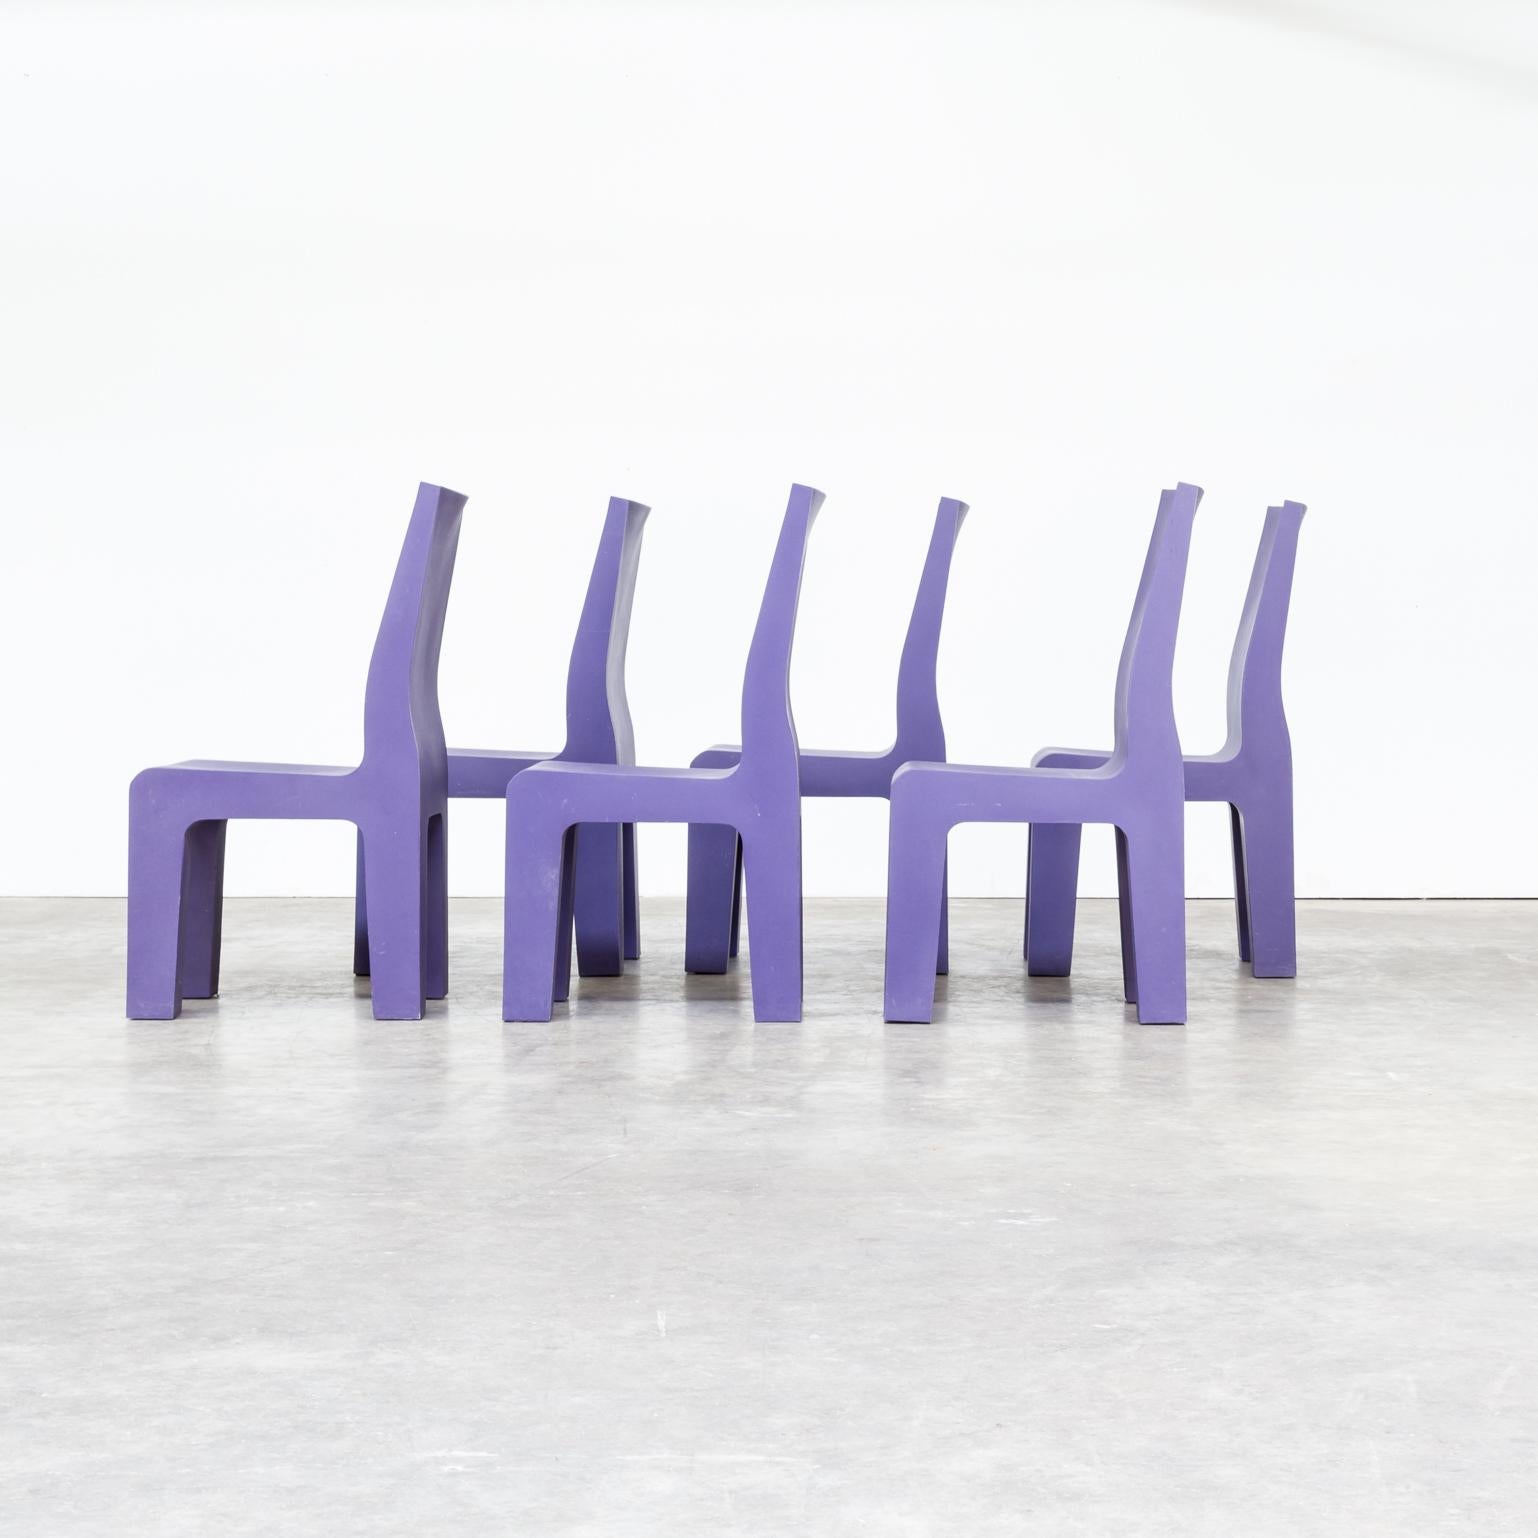 1990s Richard Hutten ‘Centraal Museum’ chair for Gispen set of six. Good condition, consistent with age and use.